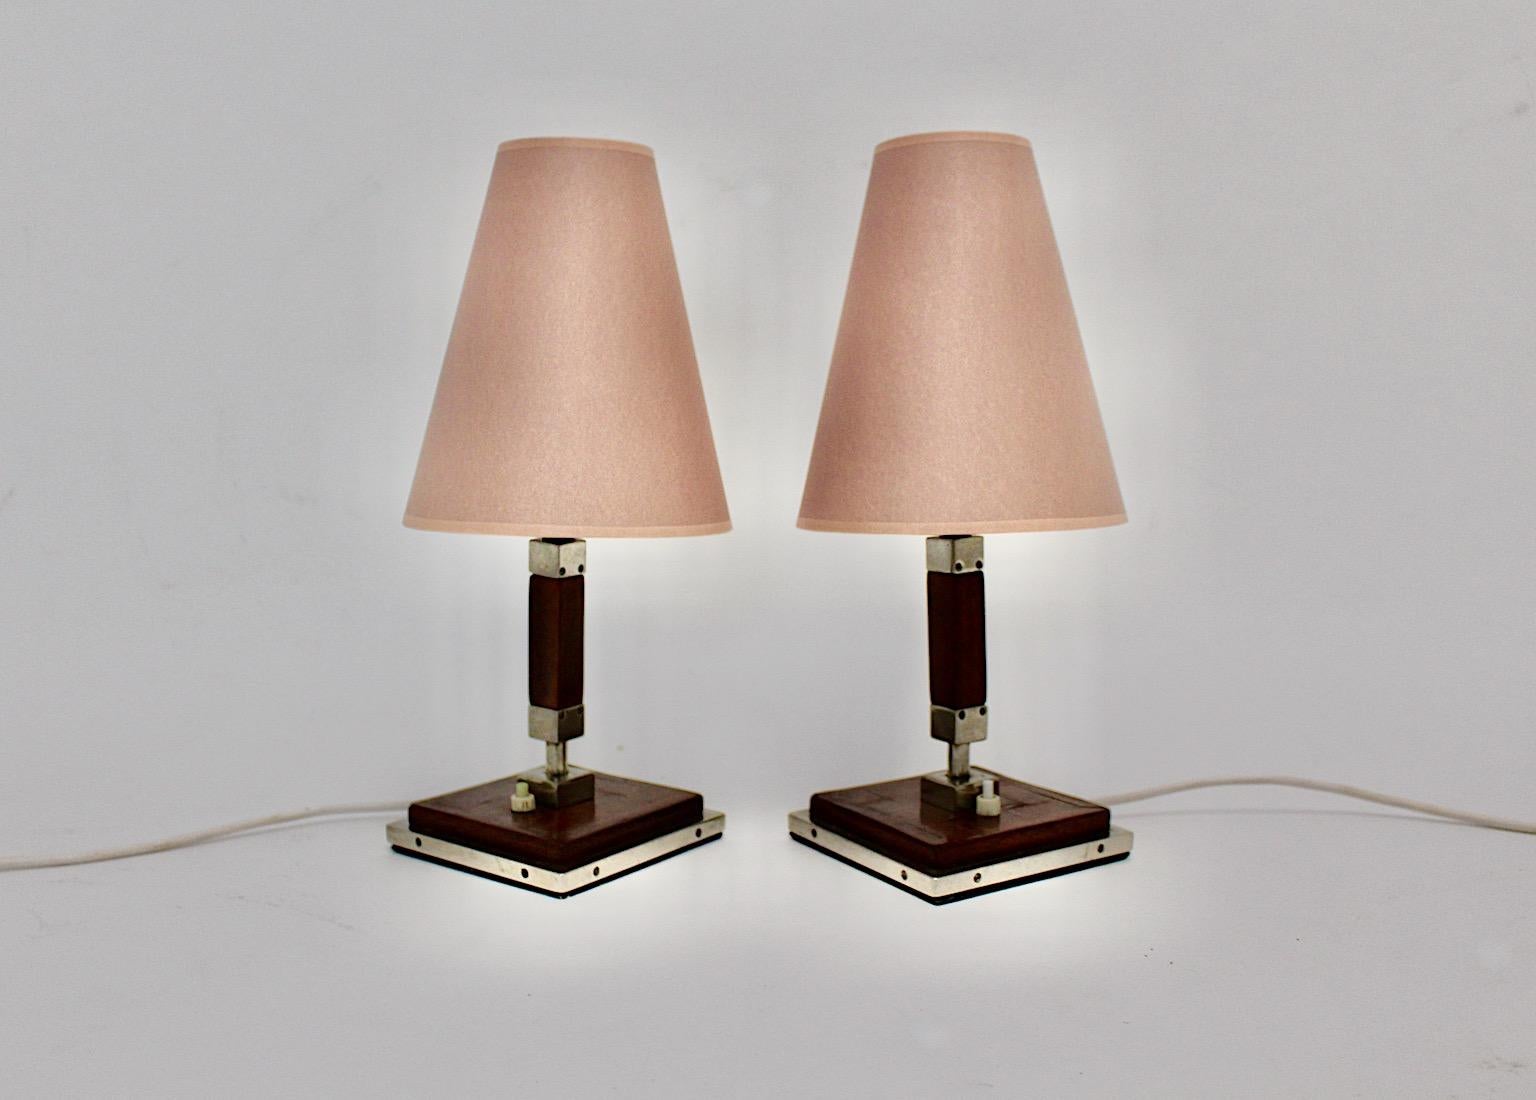 Art Deco vintage pair of table lamps or night stands from brown stained and lacquered oakwood with elegant chromed metal details at the edges and new lampshades from paper in soft mauve color tone.
The elegant styling from the table lamps is